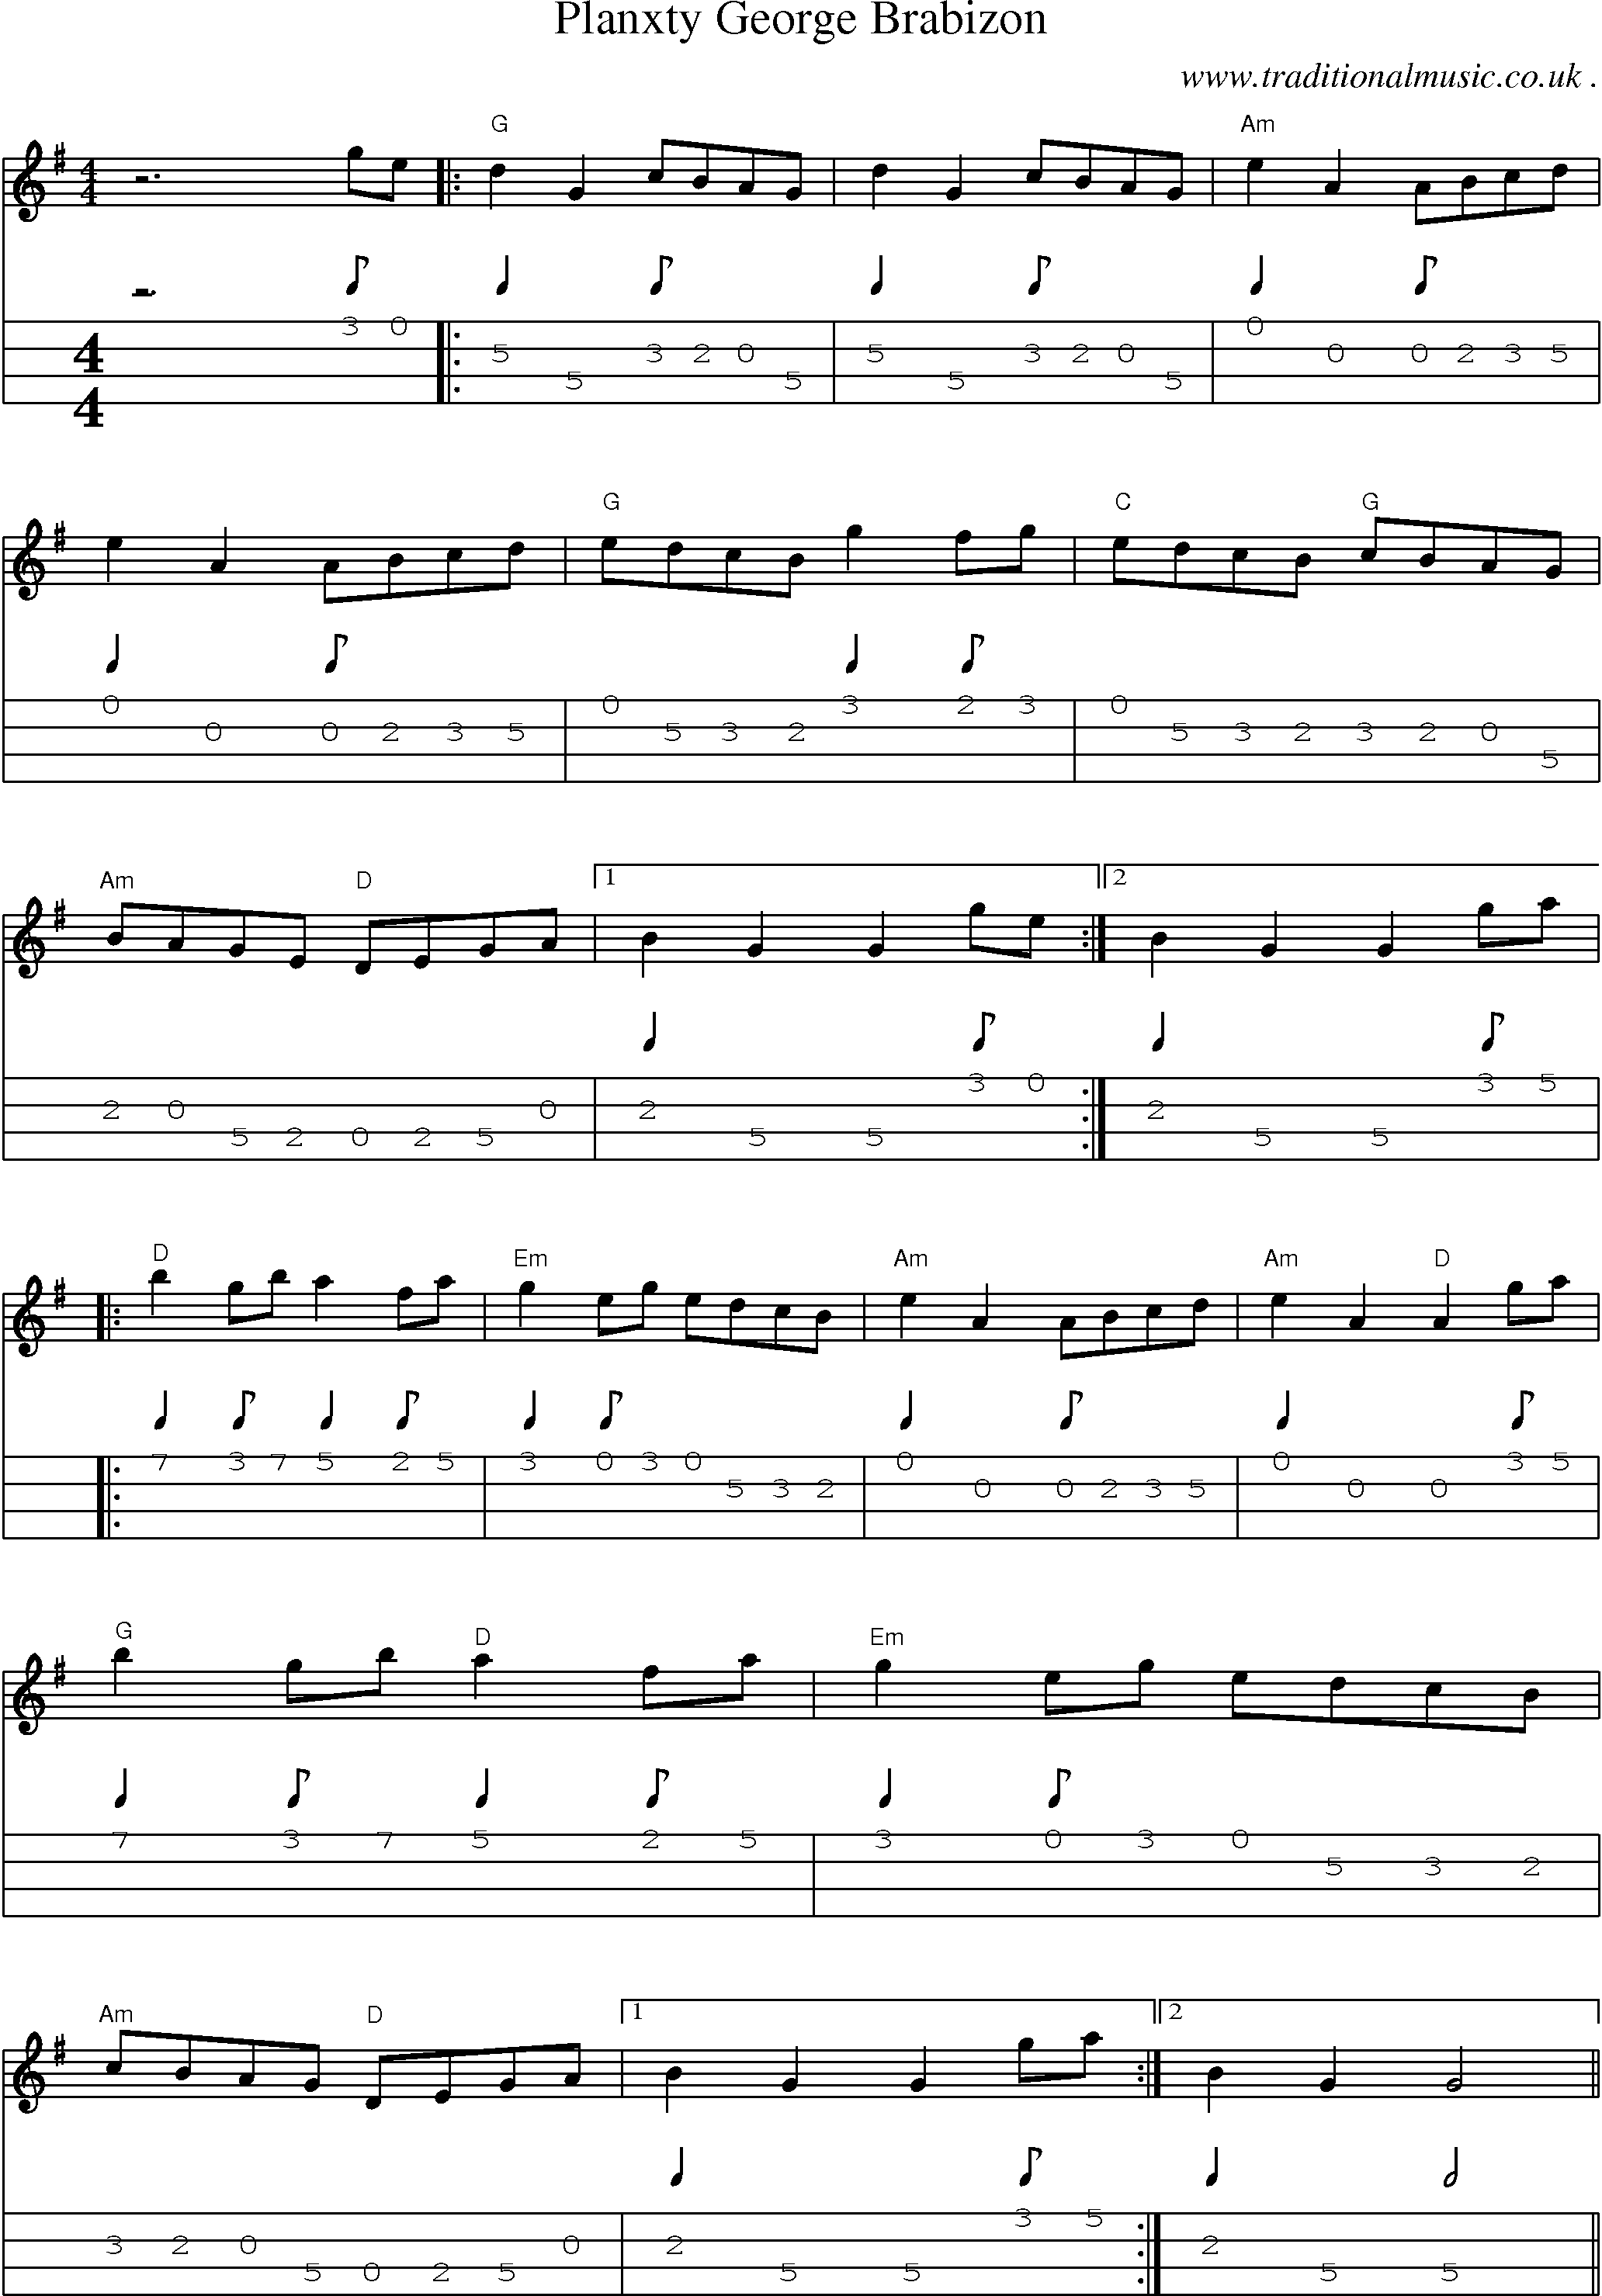 Music Score and Guitar Tabs for Planxty George Brabizon